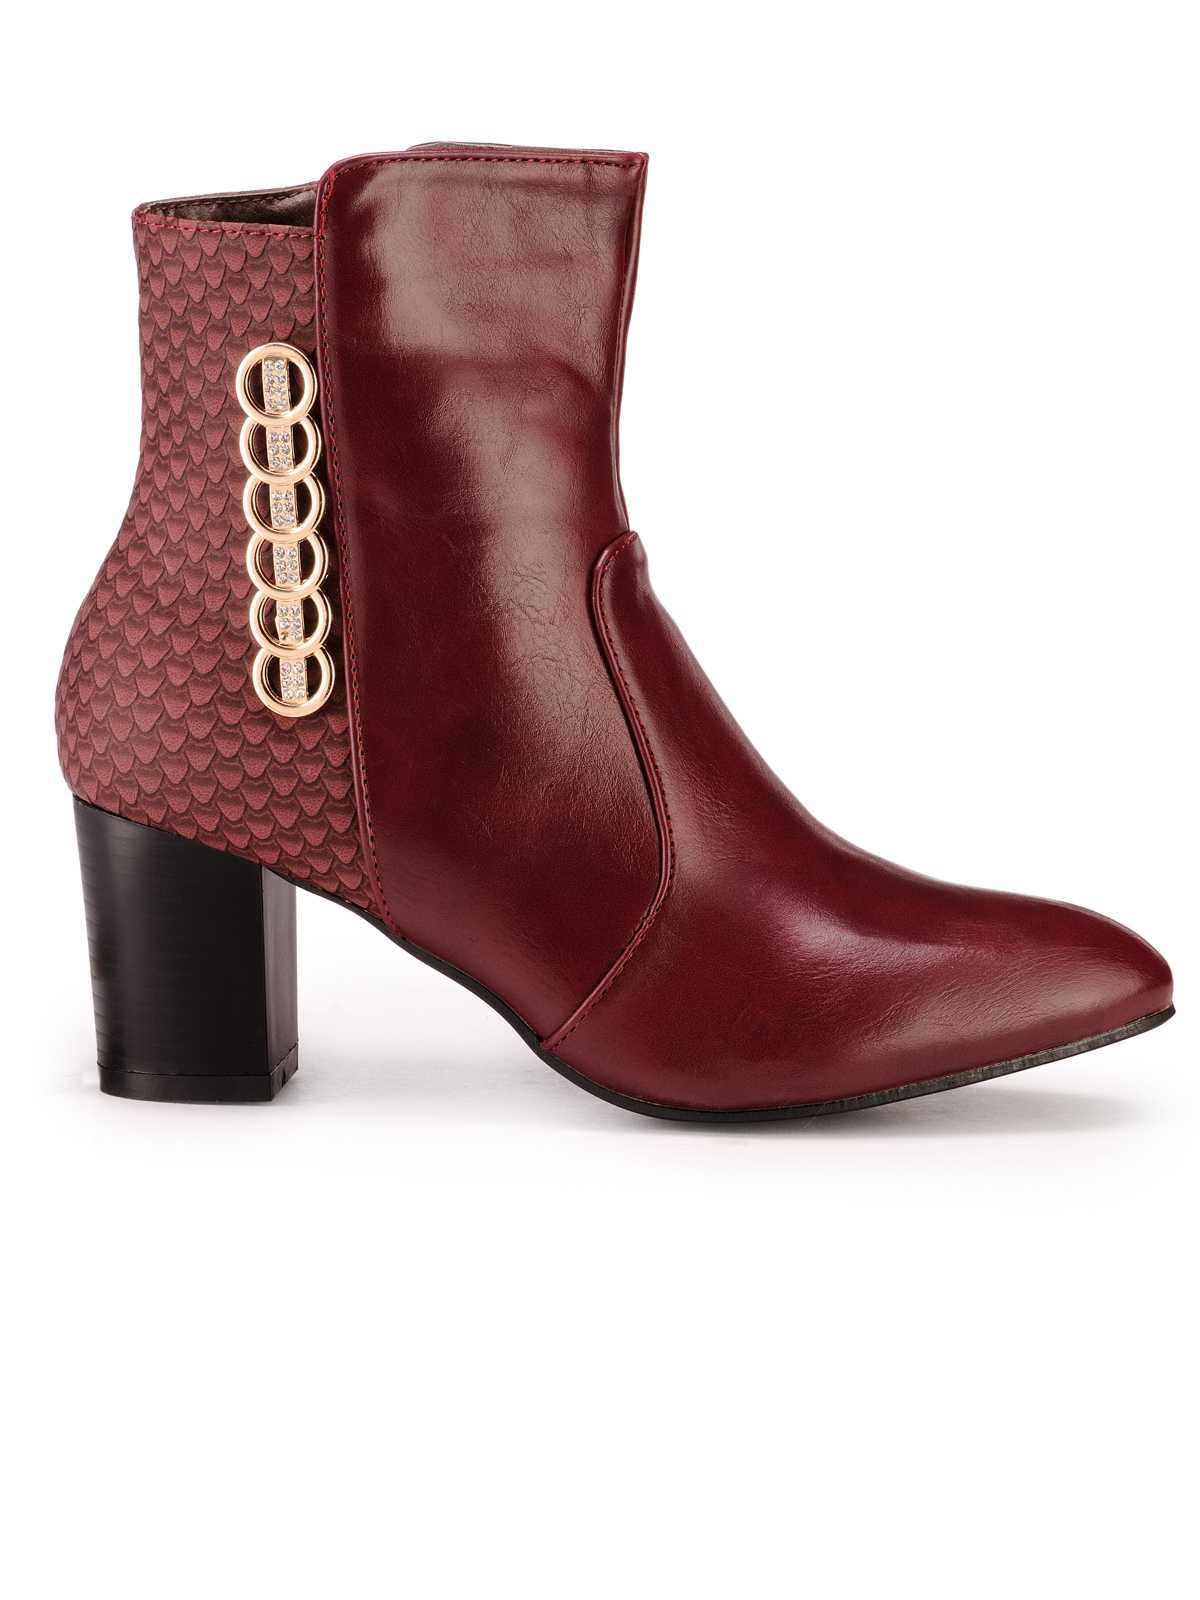 Buy Nell Women's Maroon Boots Online @ ₹3499 from ShopClues